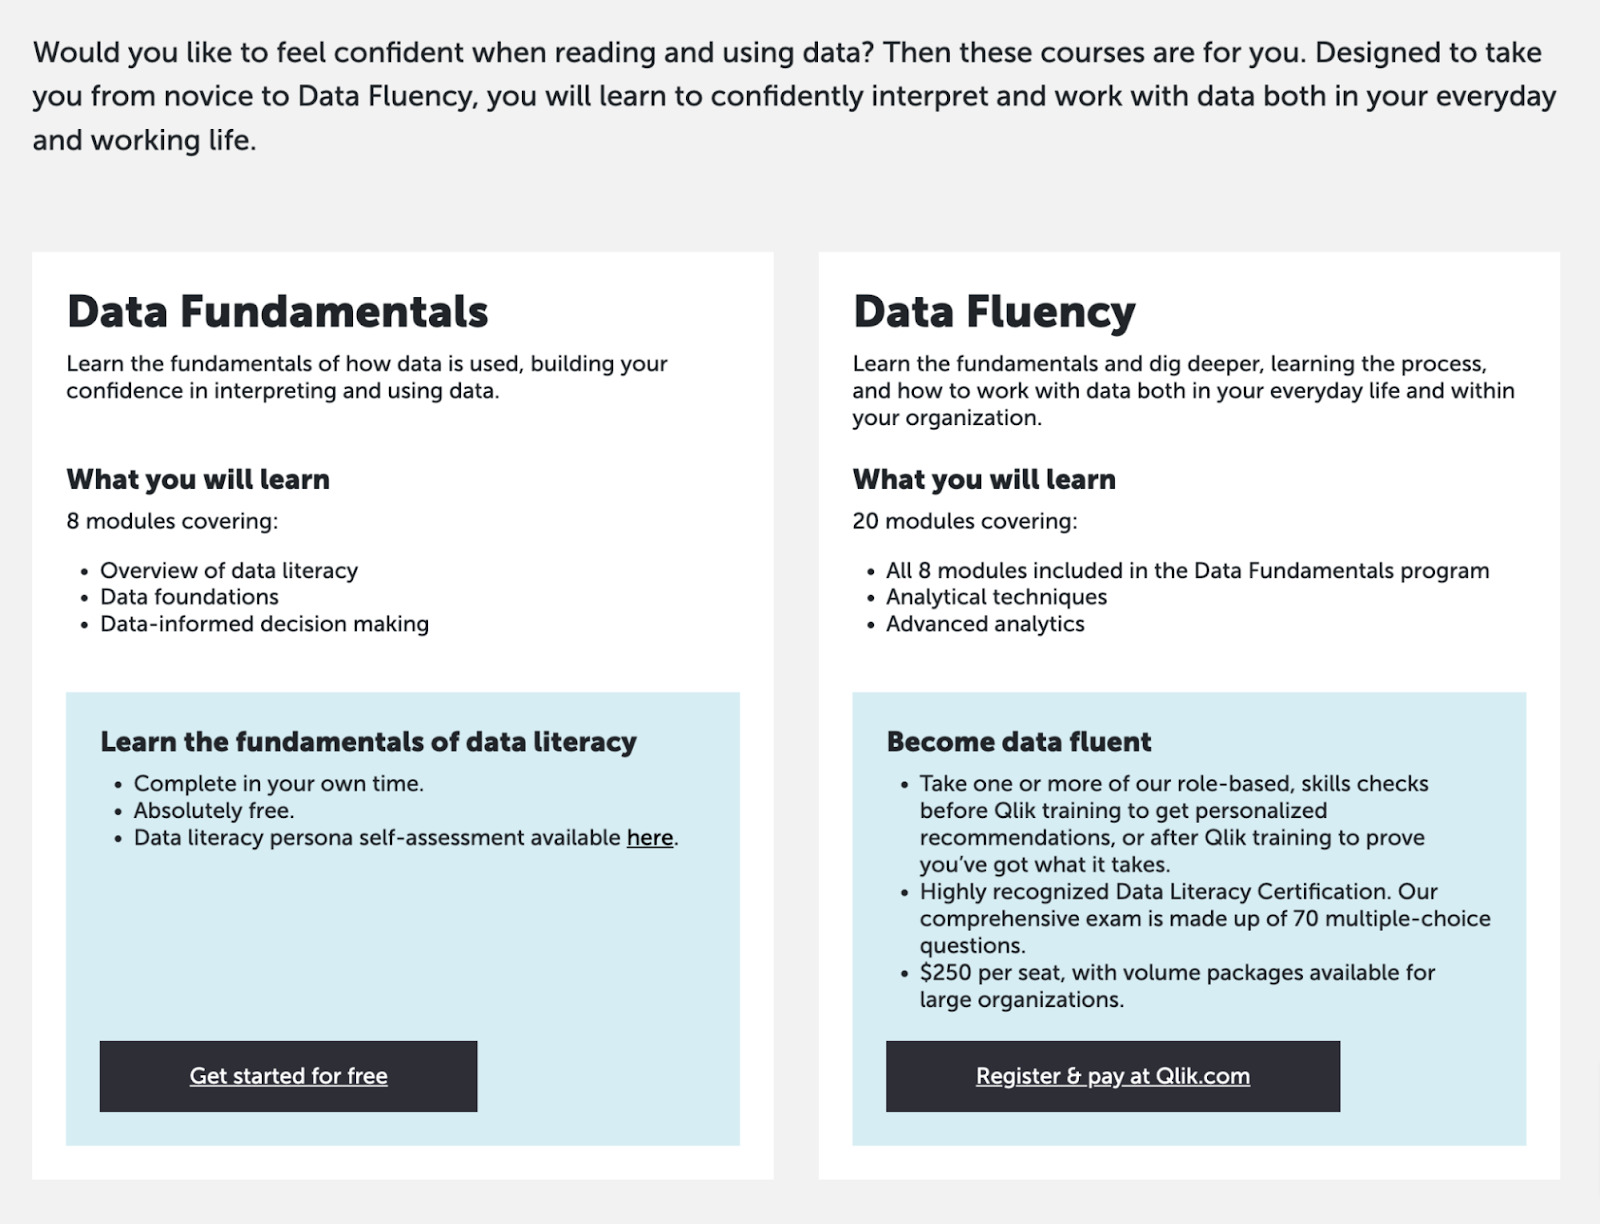 Summary of courses on data fundamentals and data fluency. Below each summary is a button for visitor to click through to start the course/register for it